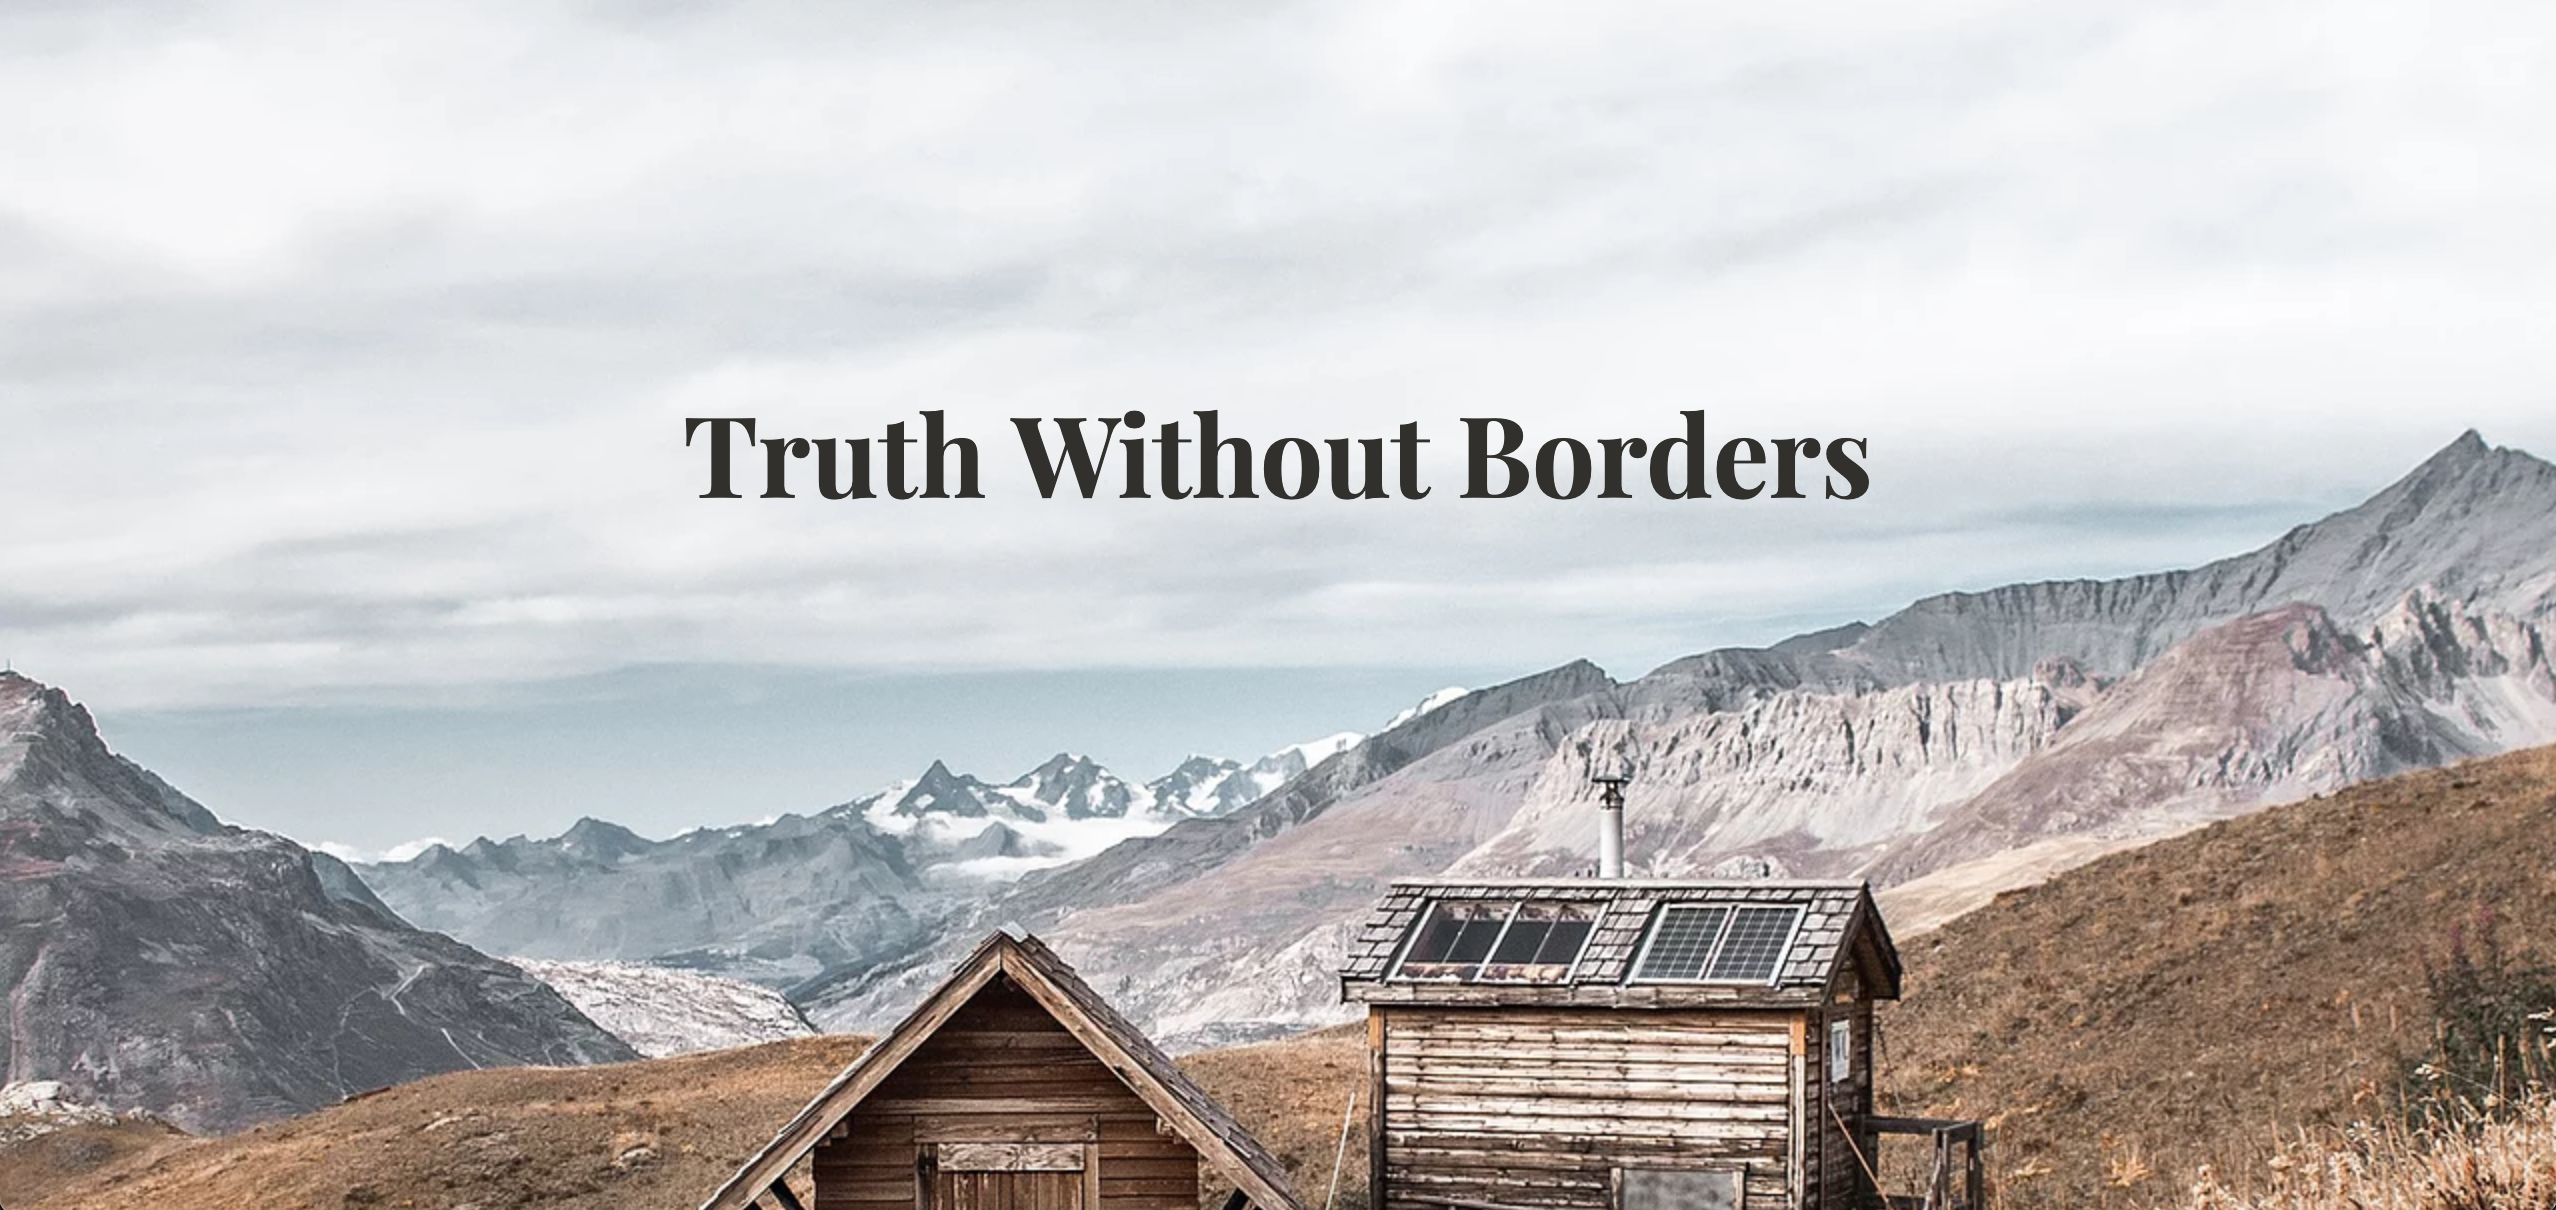 Cabins against mountains with 'Truth without Borders' overhanging it